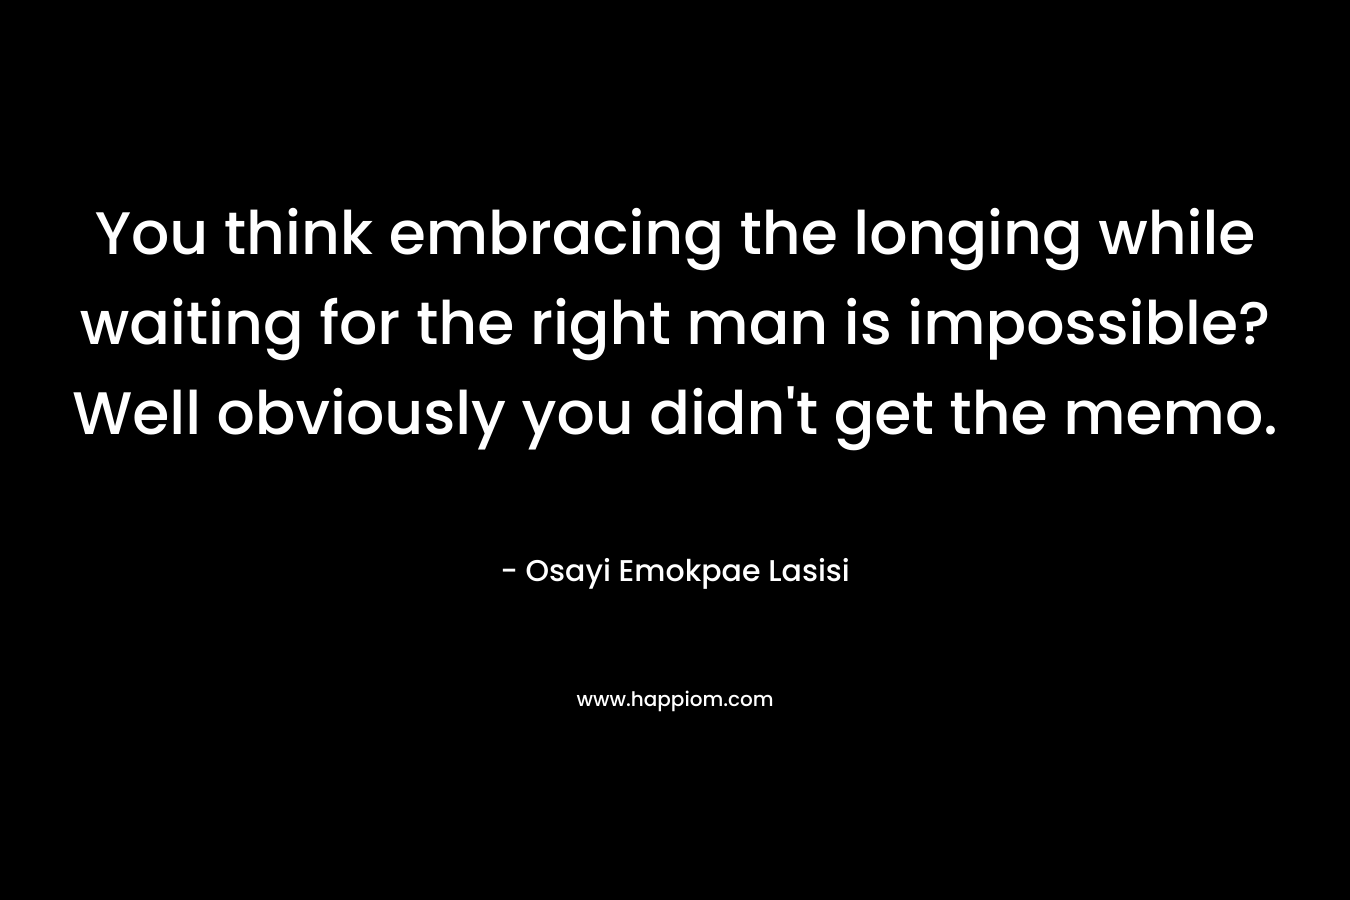 You think embracing the longing while waiting for the right man is impossible? Well obviously you didn’t get the memo. – Osayi Emokpae Lasisi